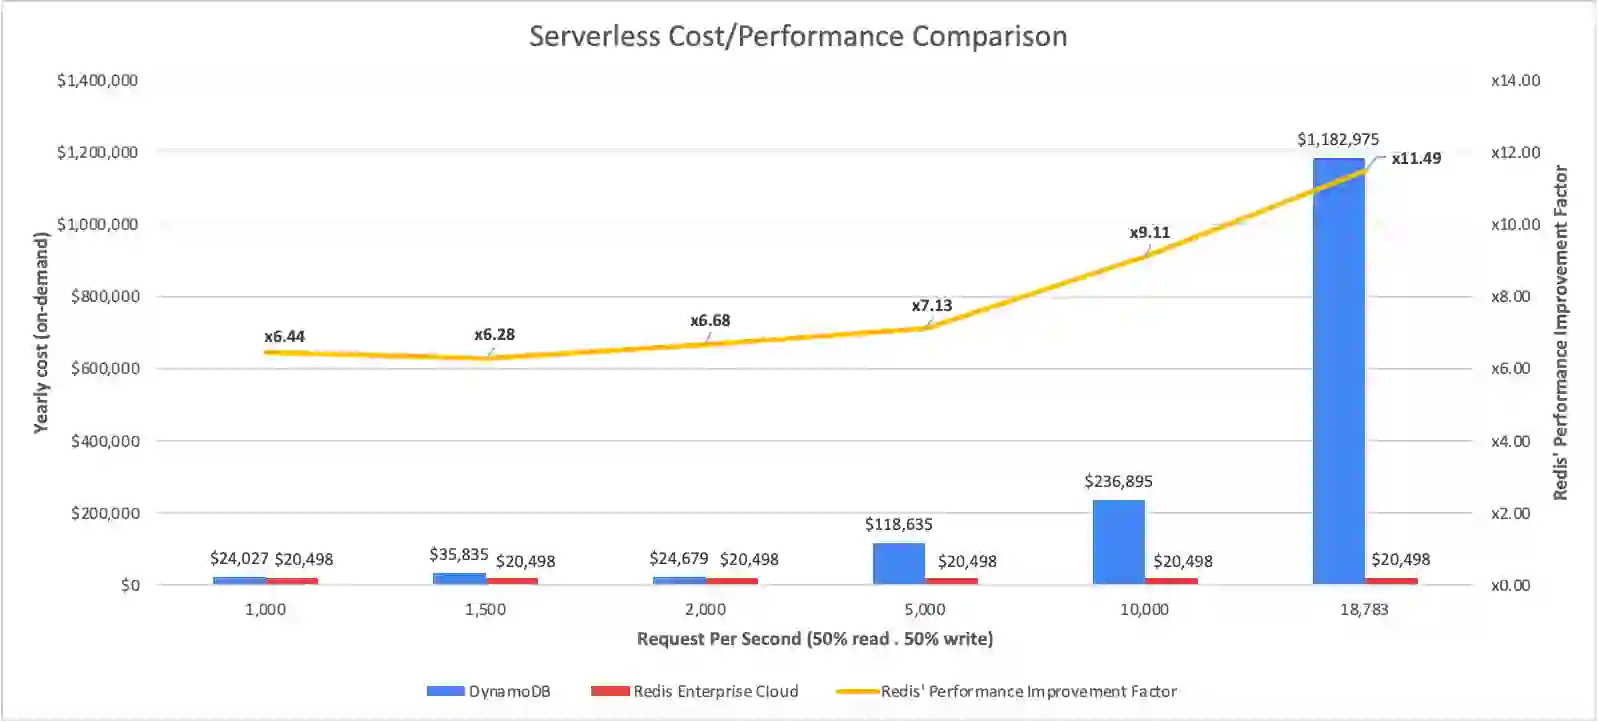 serverless database cost and performance comparison graph